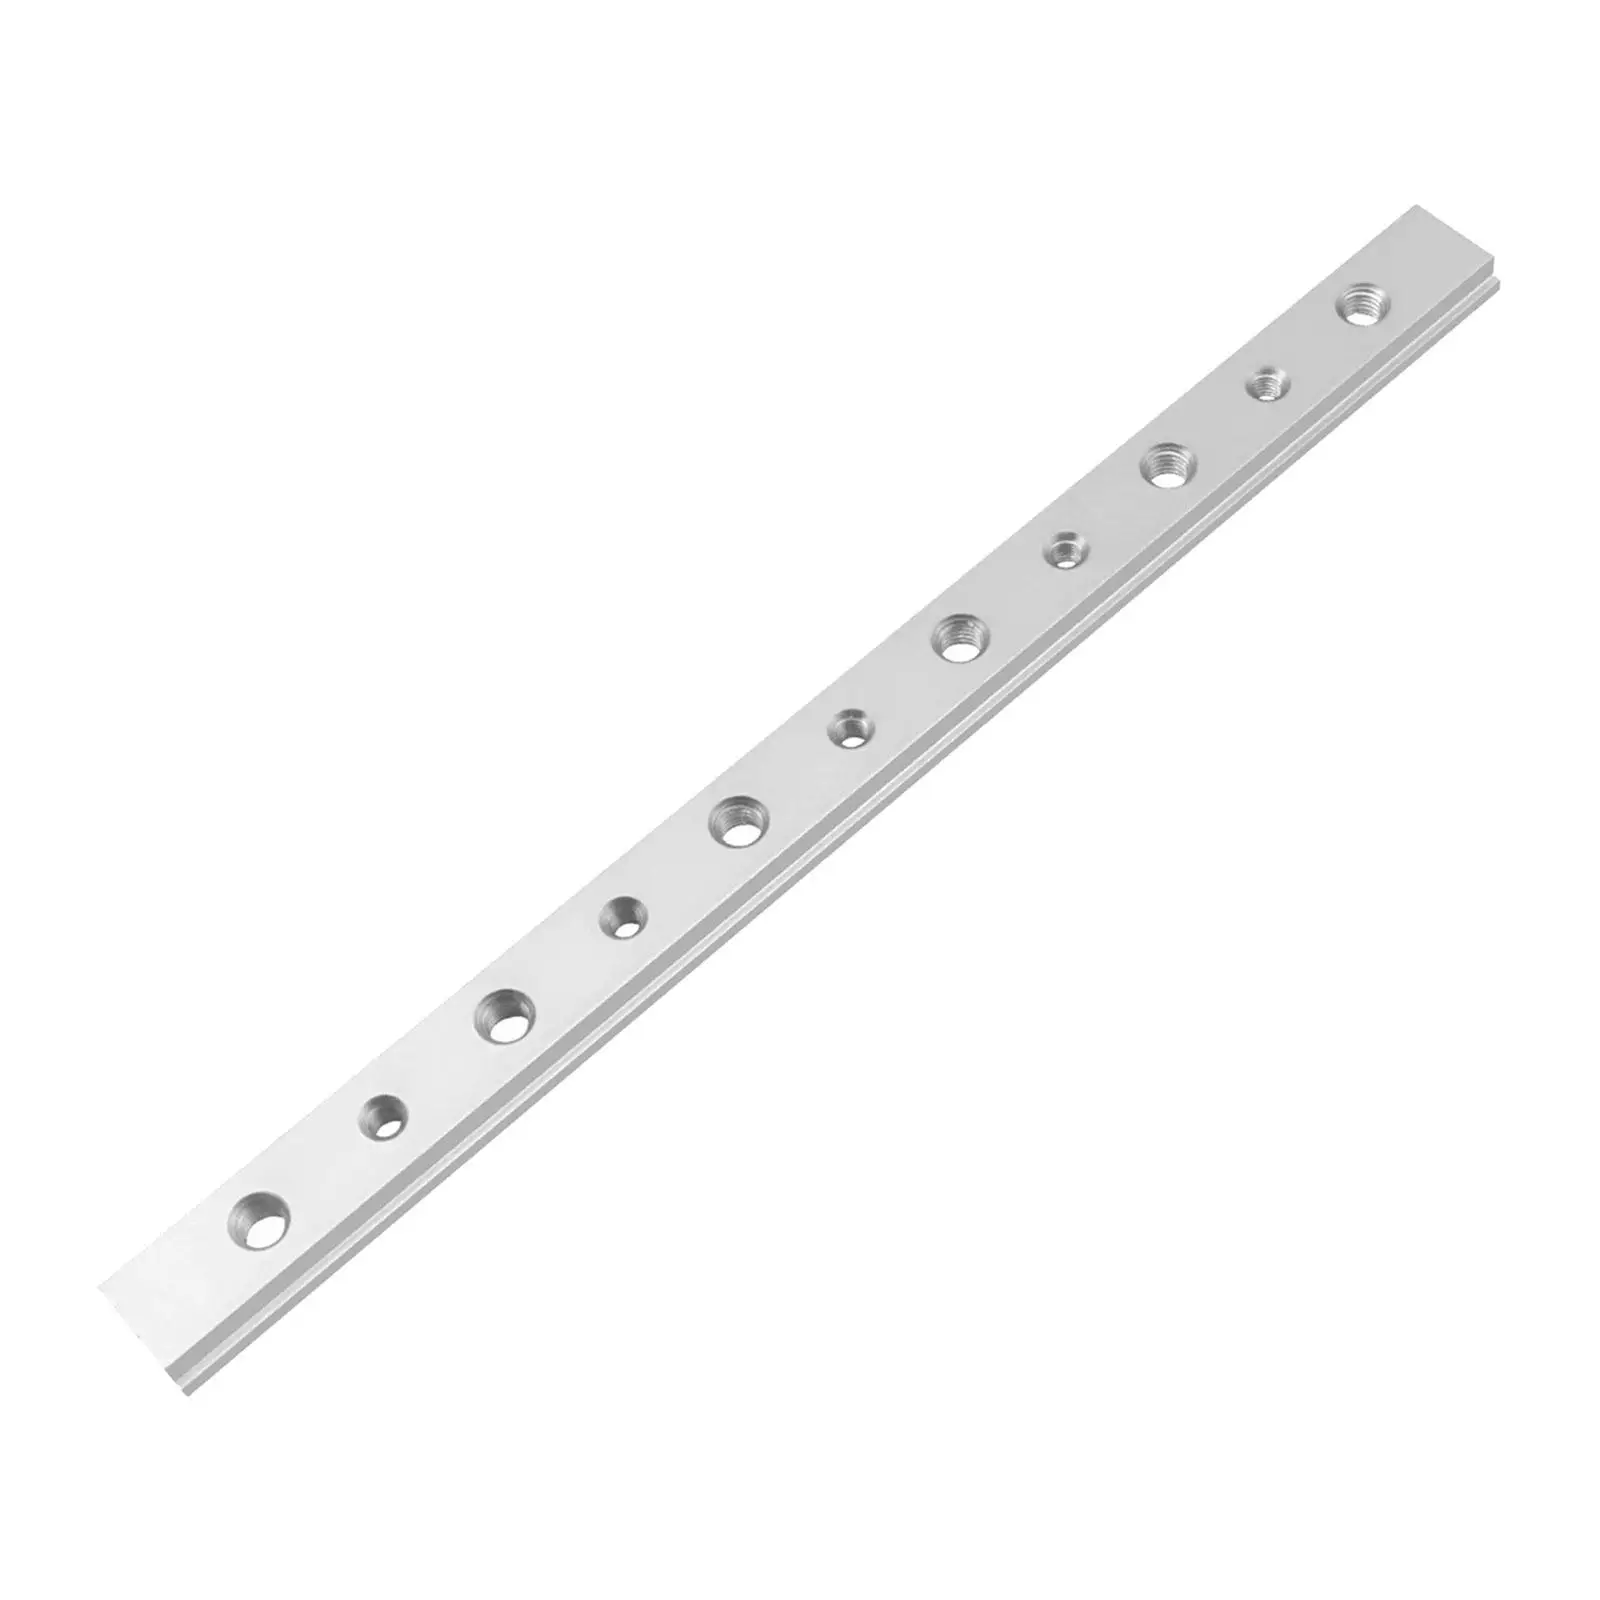 Miter Bar for Tension Devices, Sledge 300mm / 11.81`` Universal Easy to Use Durable Adjustable Jig and Fixture Bar Miter Slider